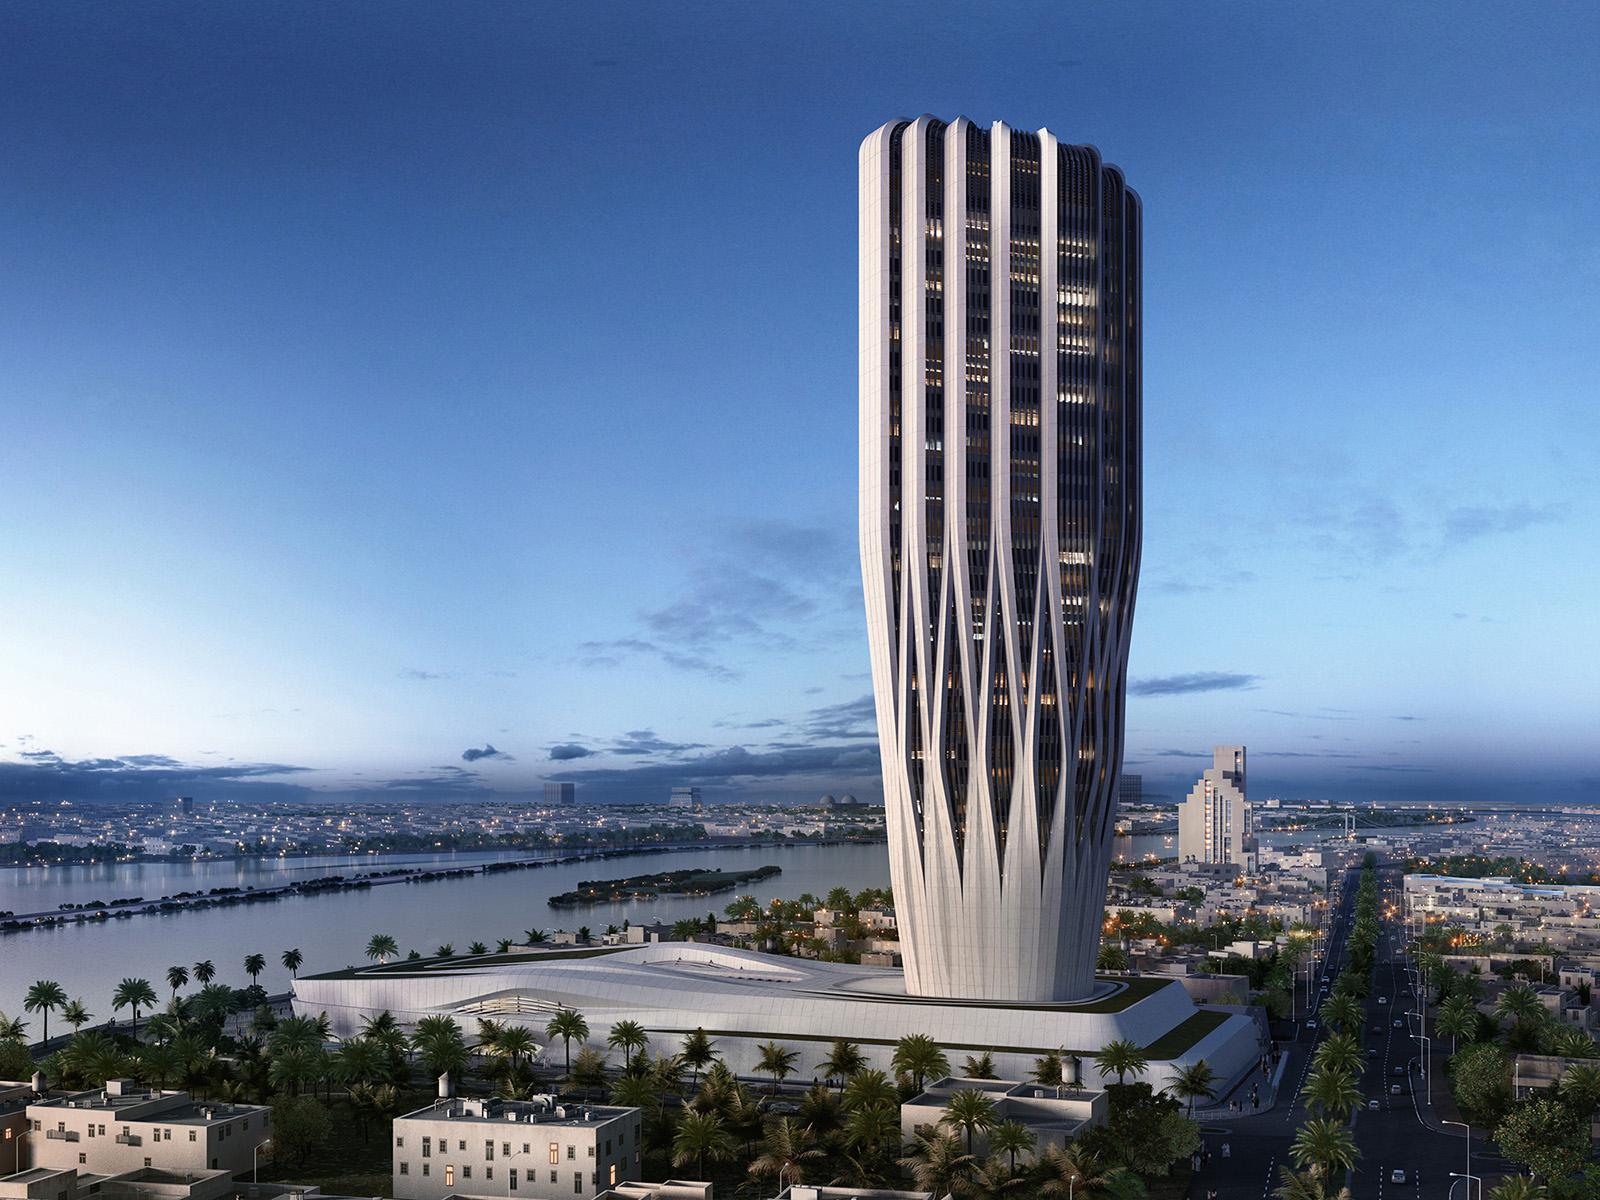 Zaha Hadid Tower, officially the tallest building in Baghdad